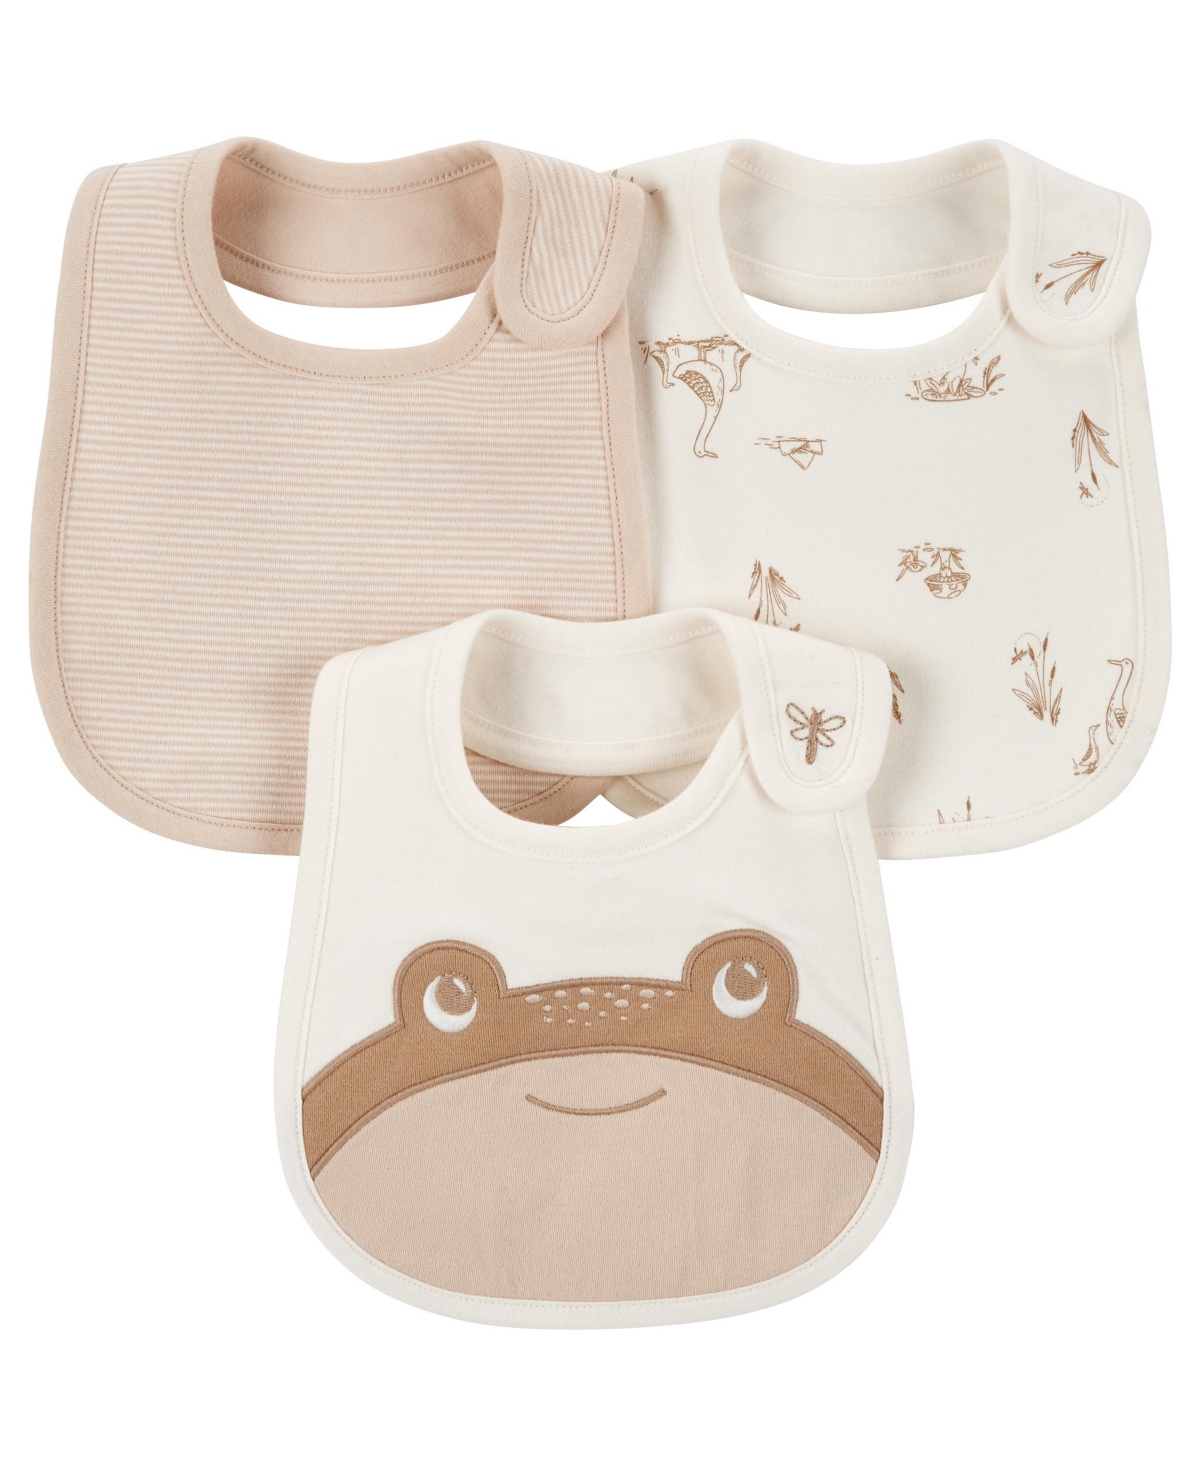 Carter's Baby Boys Or Baby Girls Bibs, Pack Of 3 In Neutral